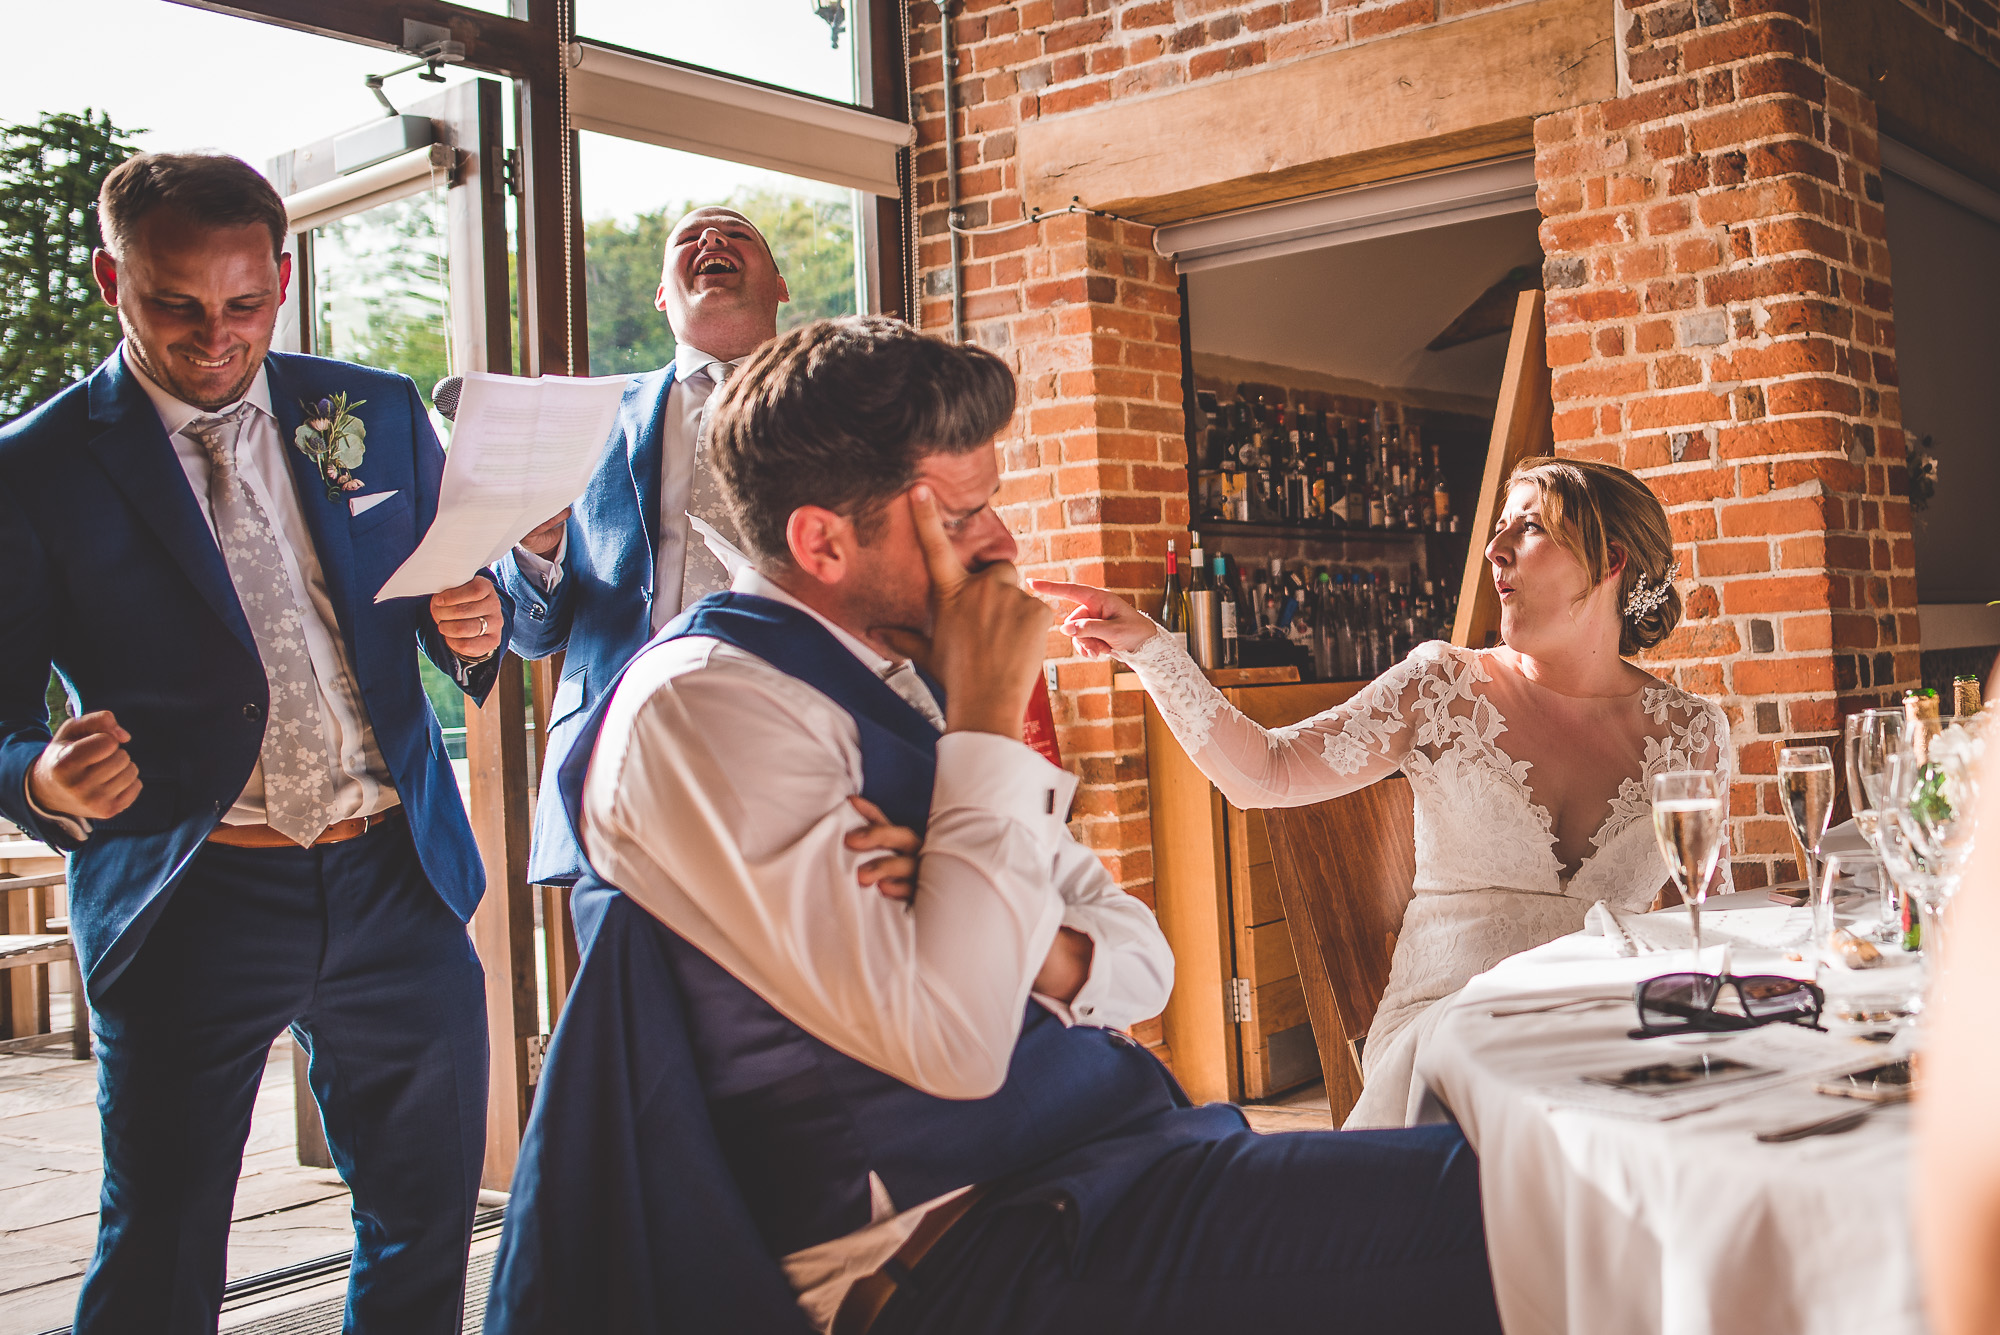 A wedding photographer captures the joyous moment of a bride and groom laughing during their speech at a wedding.